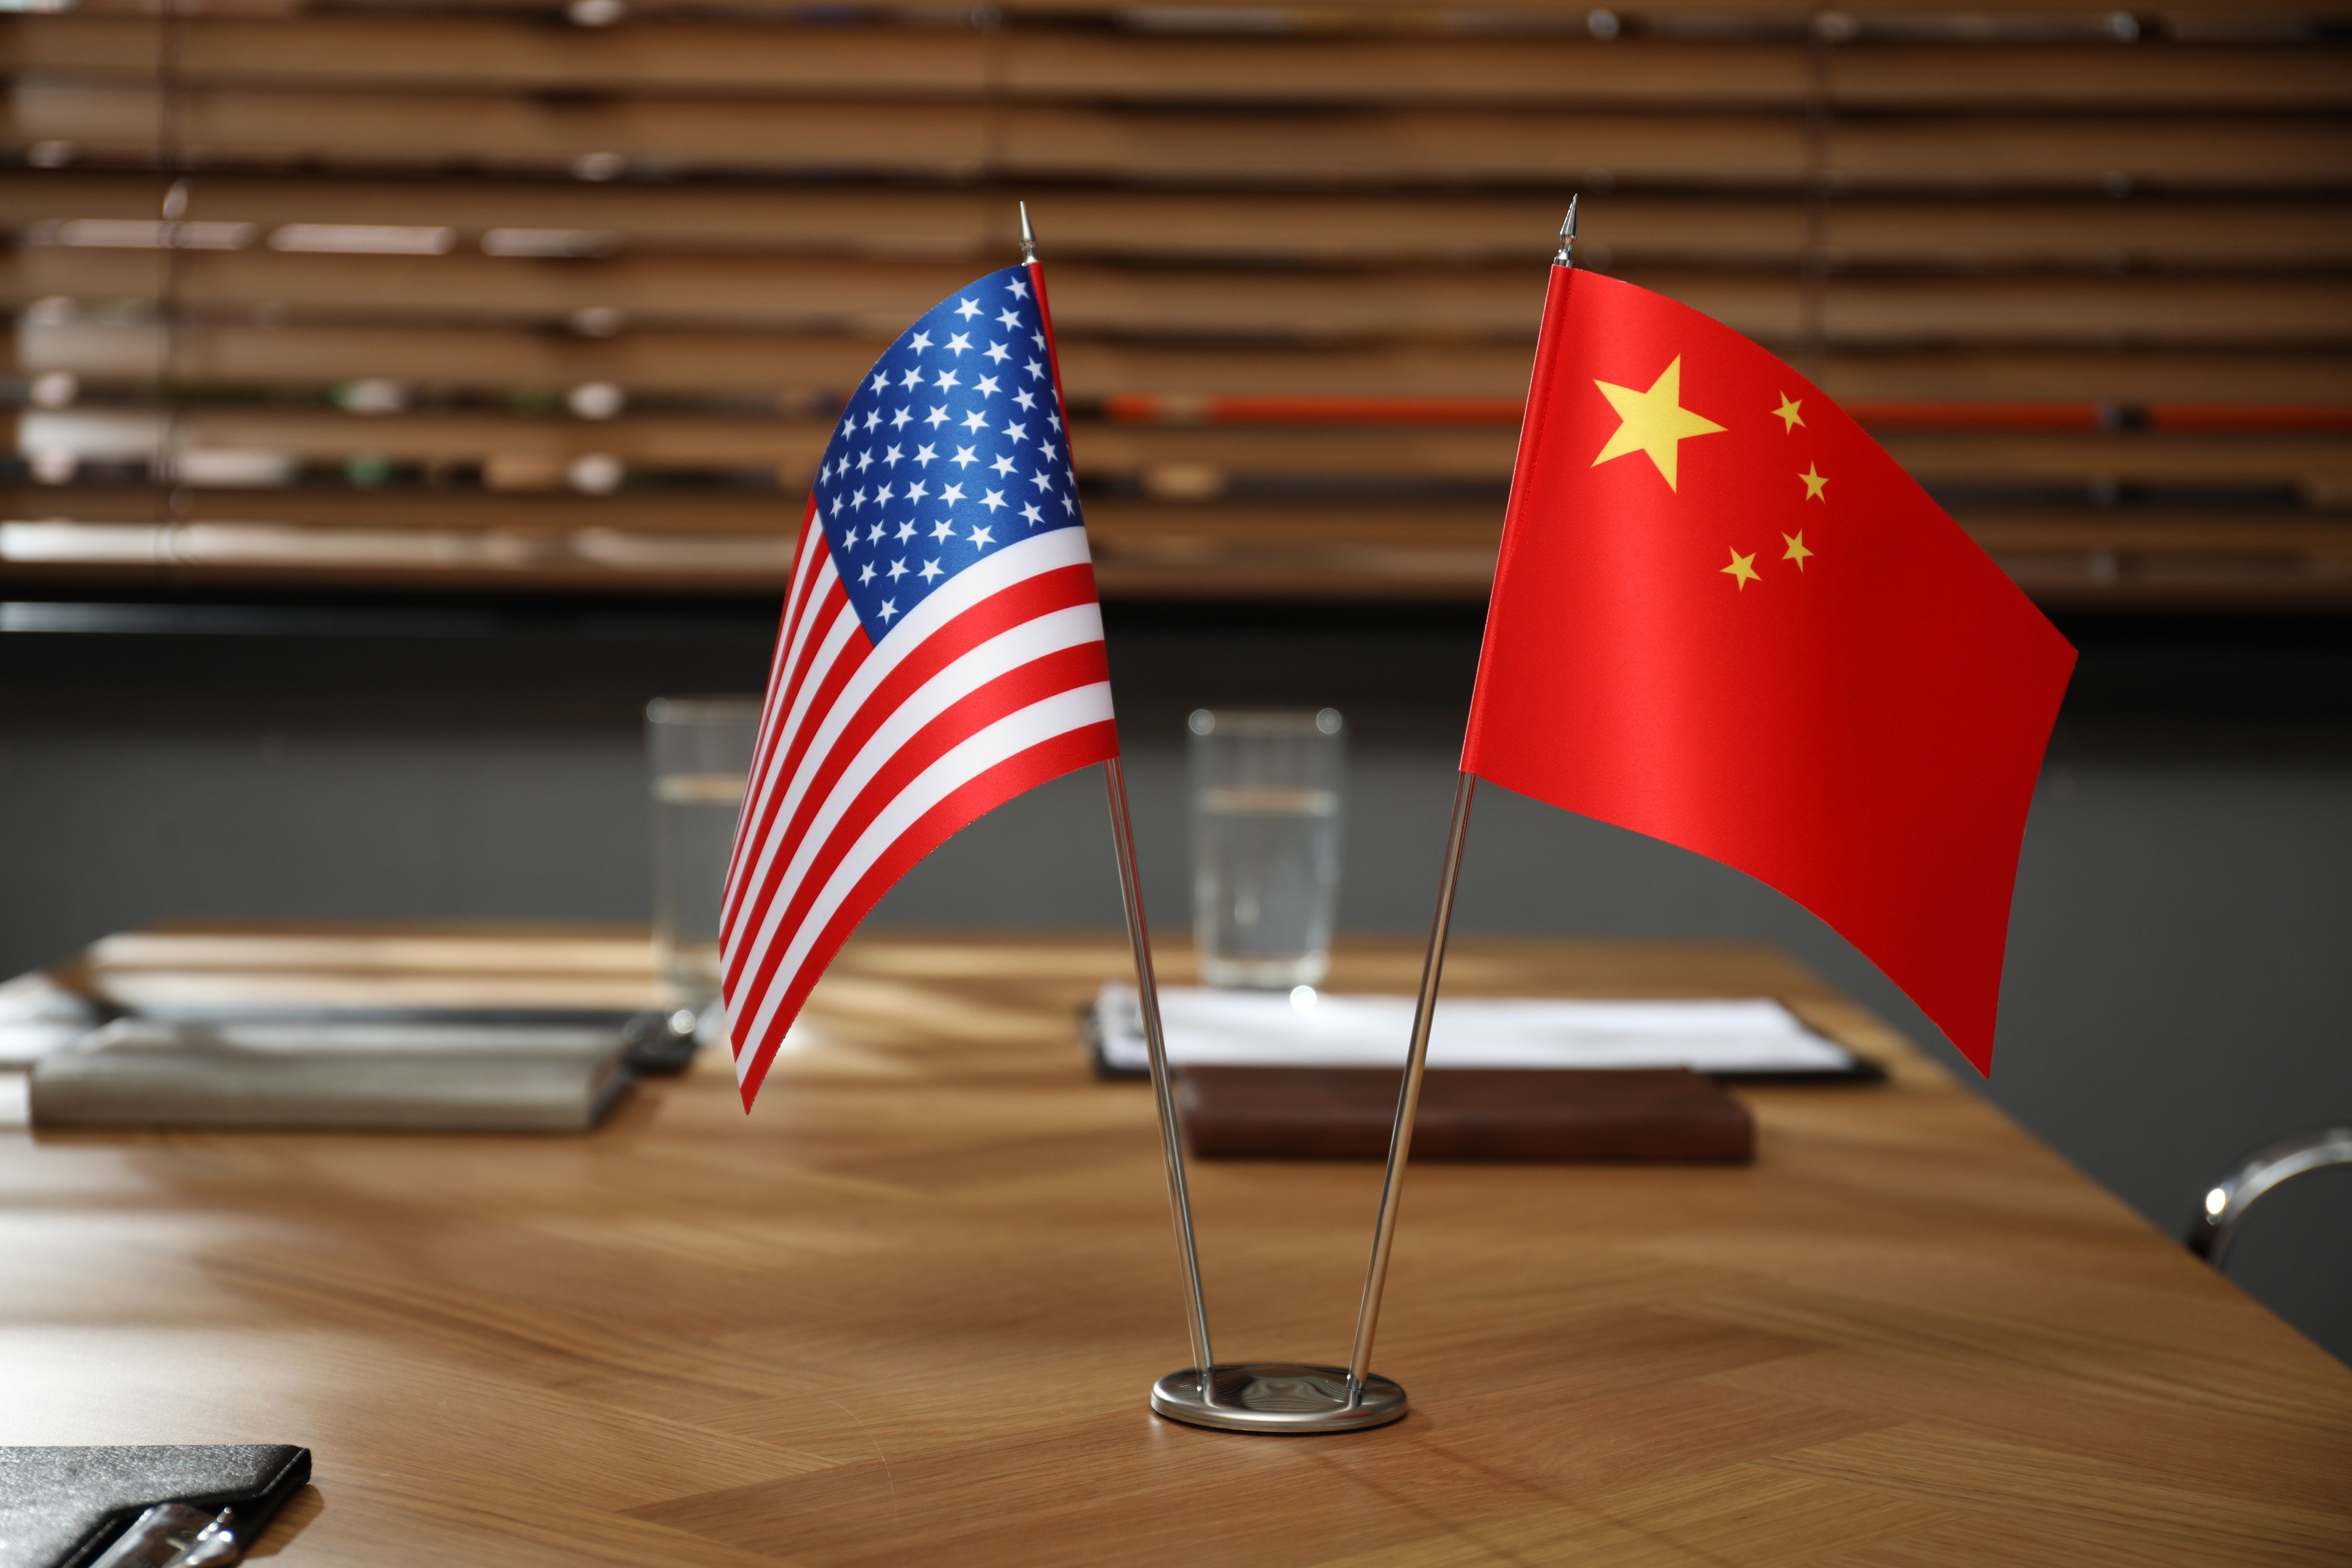 US-China people-to-people exchanges should be increased, scholars at a Washington think tank said on Thursday. Photo: Shutterstock